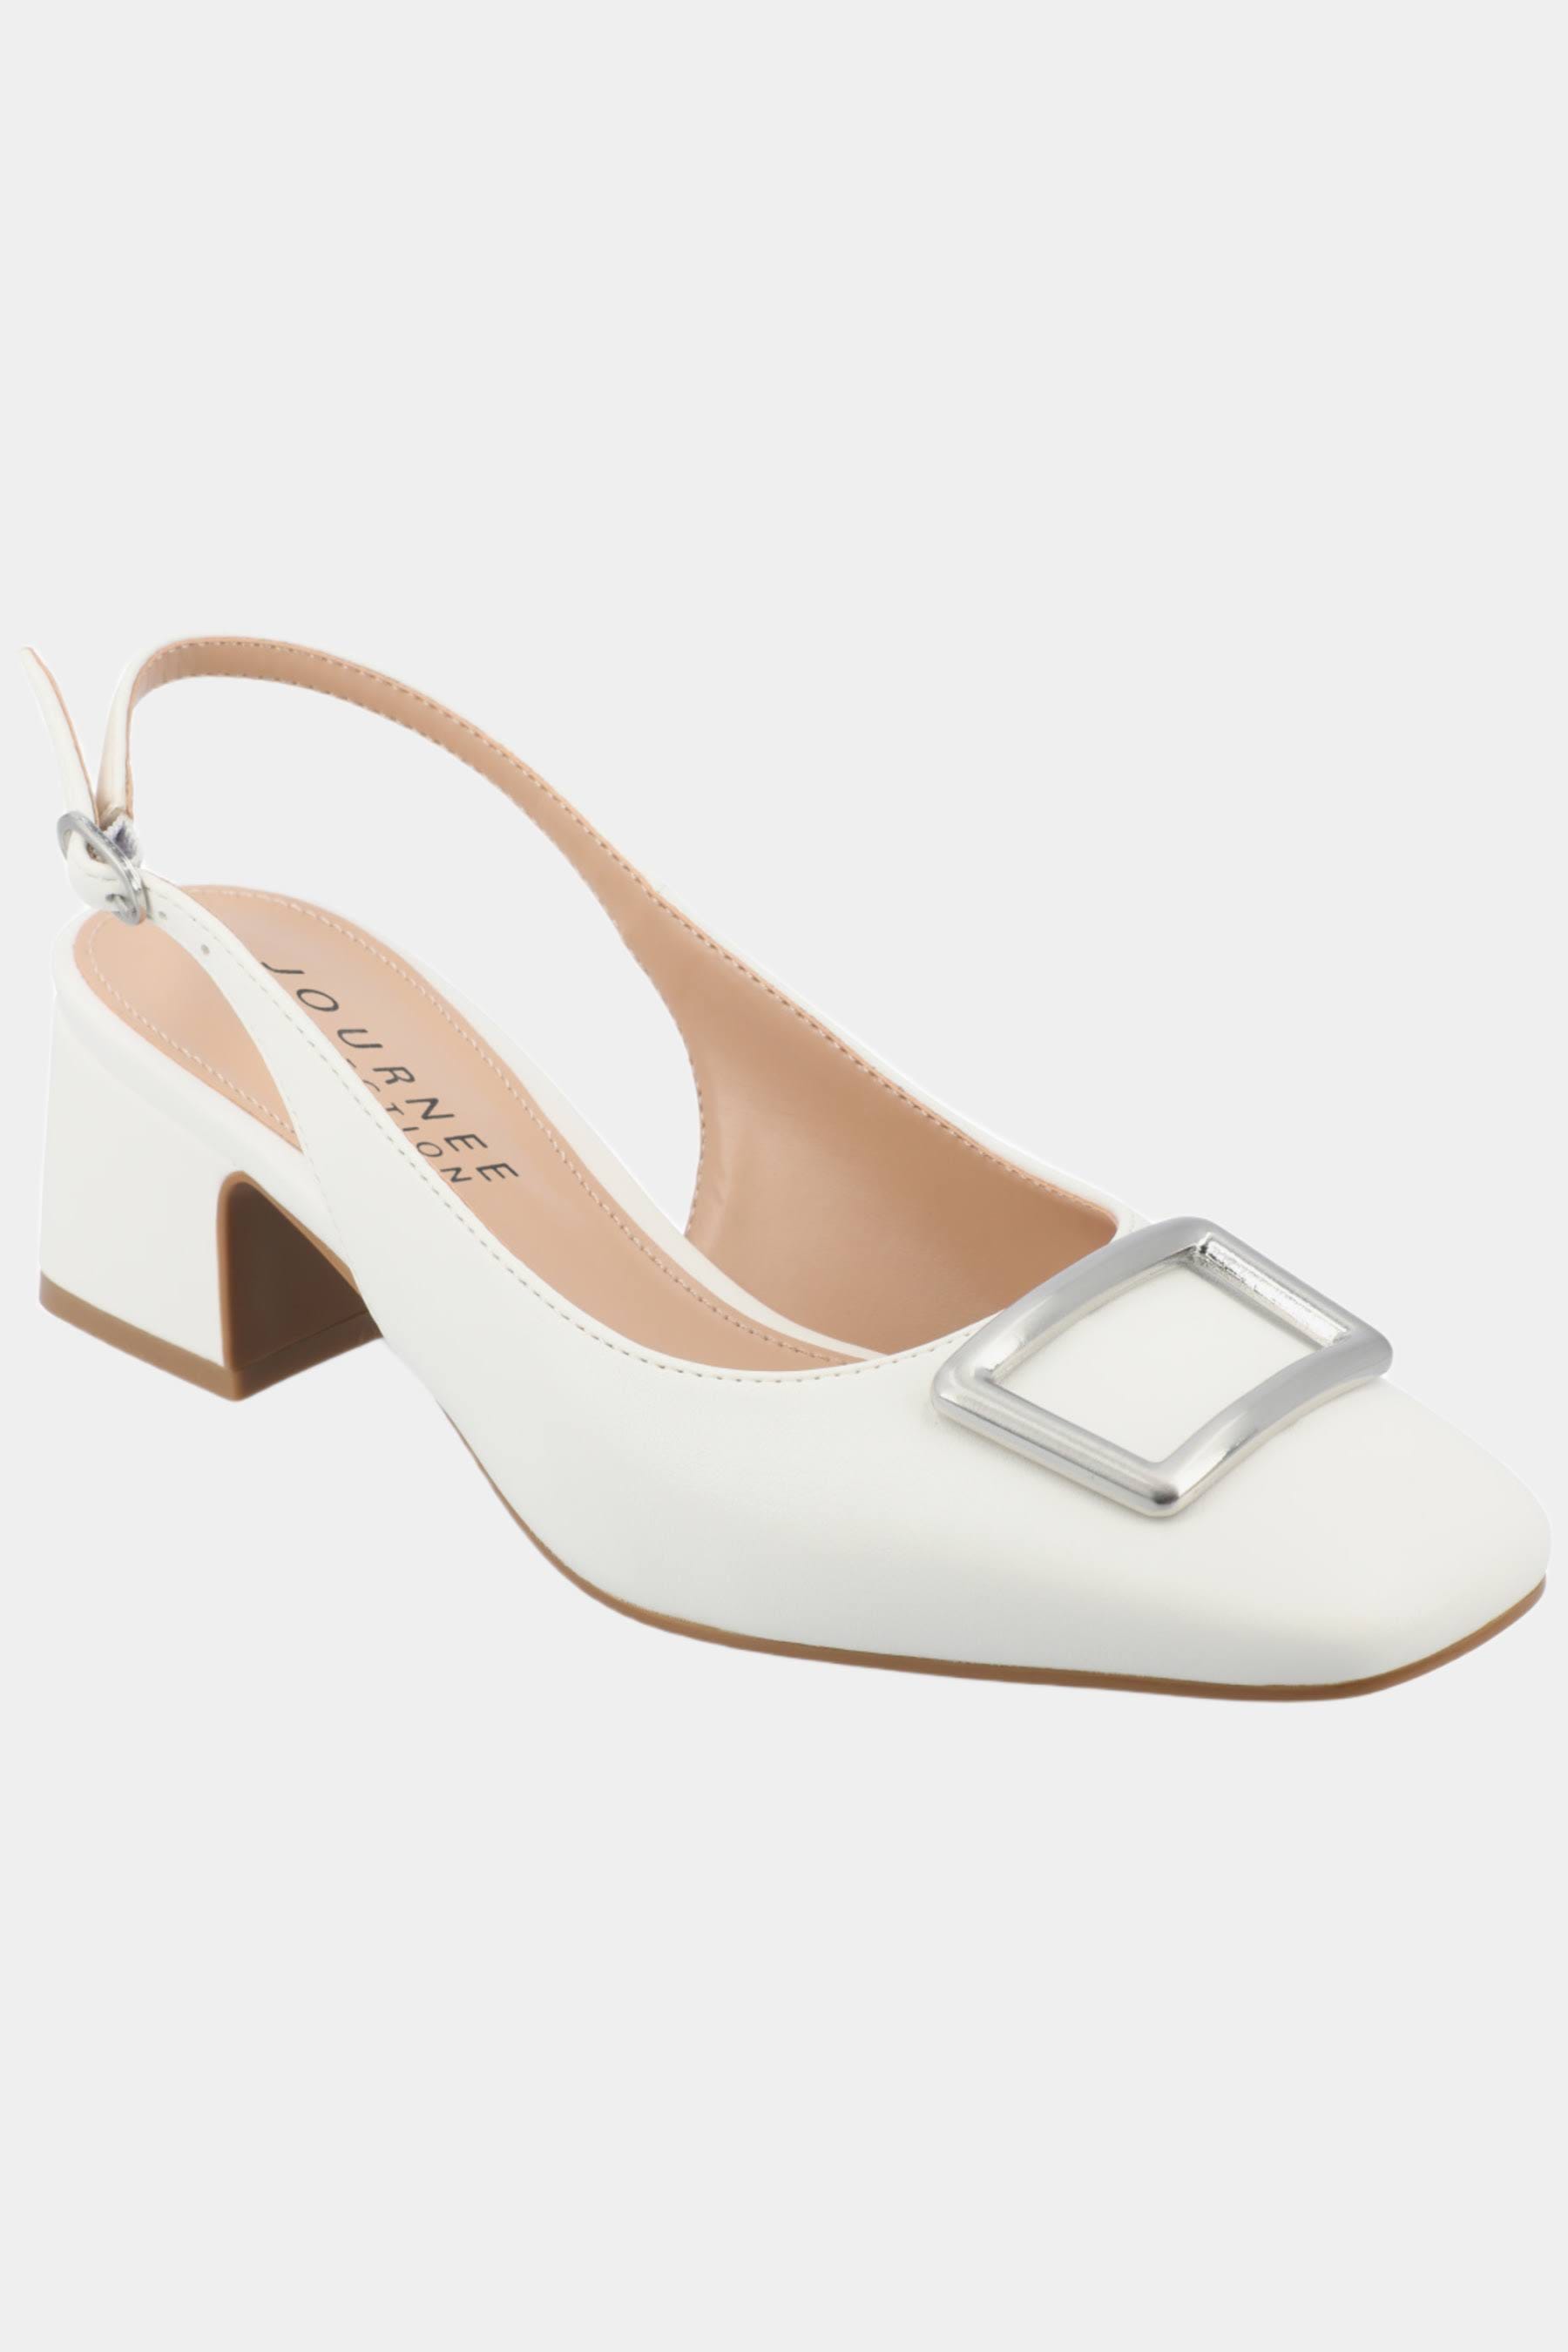 Comfortable White Slingback Pumps with Square Toe and Block Heel | Image